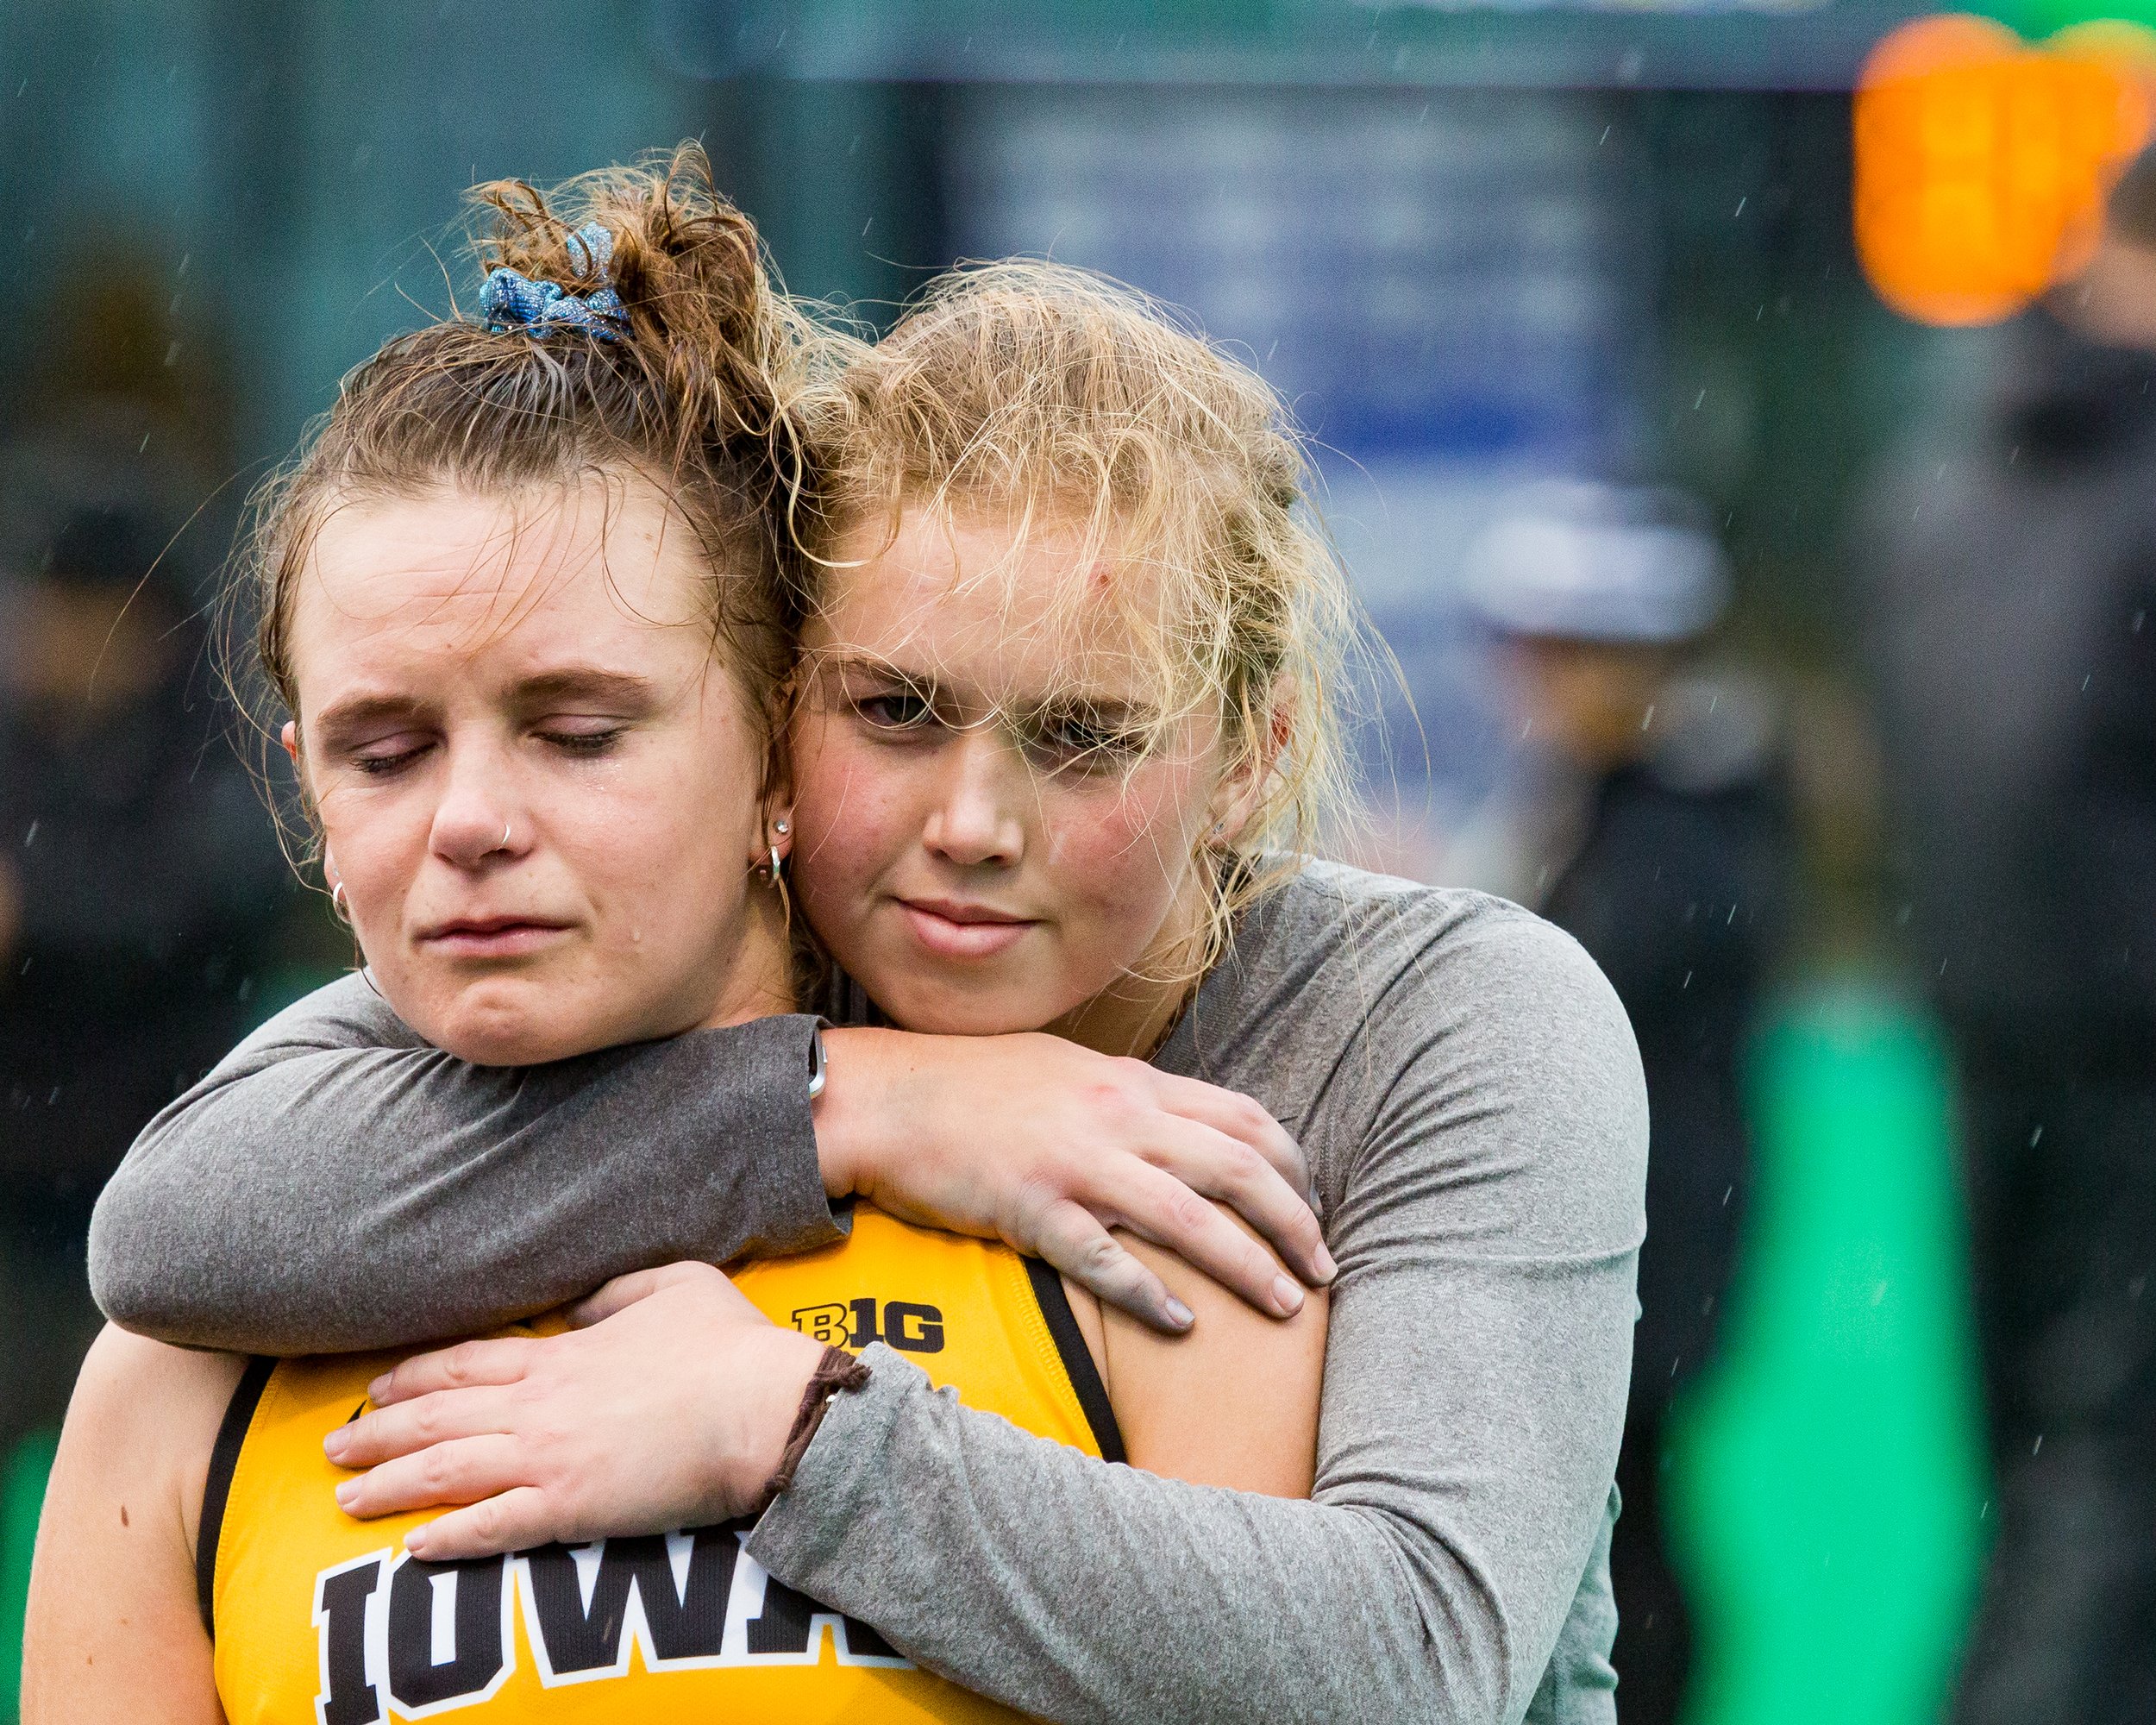  Iowa goalkeeper Leslie Speight hugs Iowa forward Maddy Murphy after the Championship Game in the Big Ten Field Hockey Tournament at Lakeside Field in Evanston, IL on Sunday, Nov. 3, 2018. The no. 2 ranked Terrapins defeated the no. 8 ranked Hawkeyes